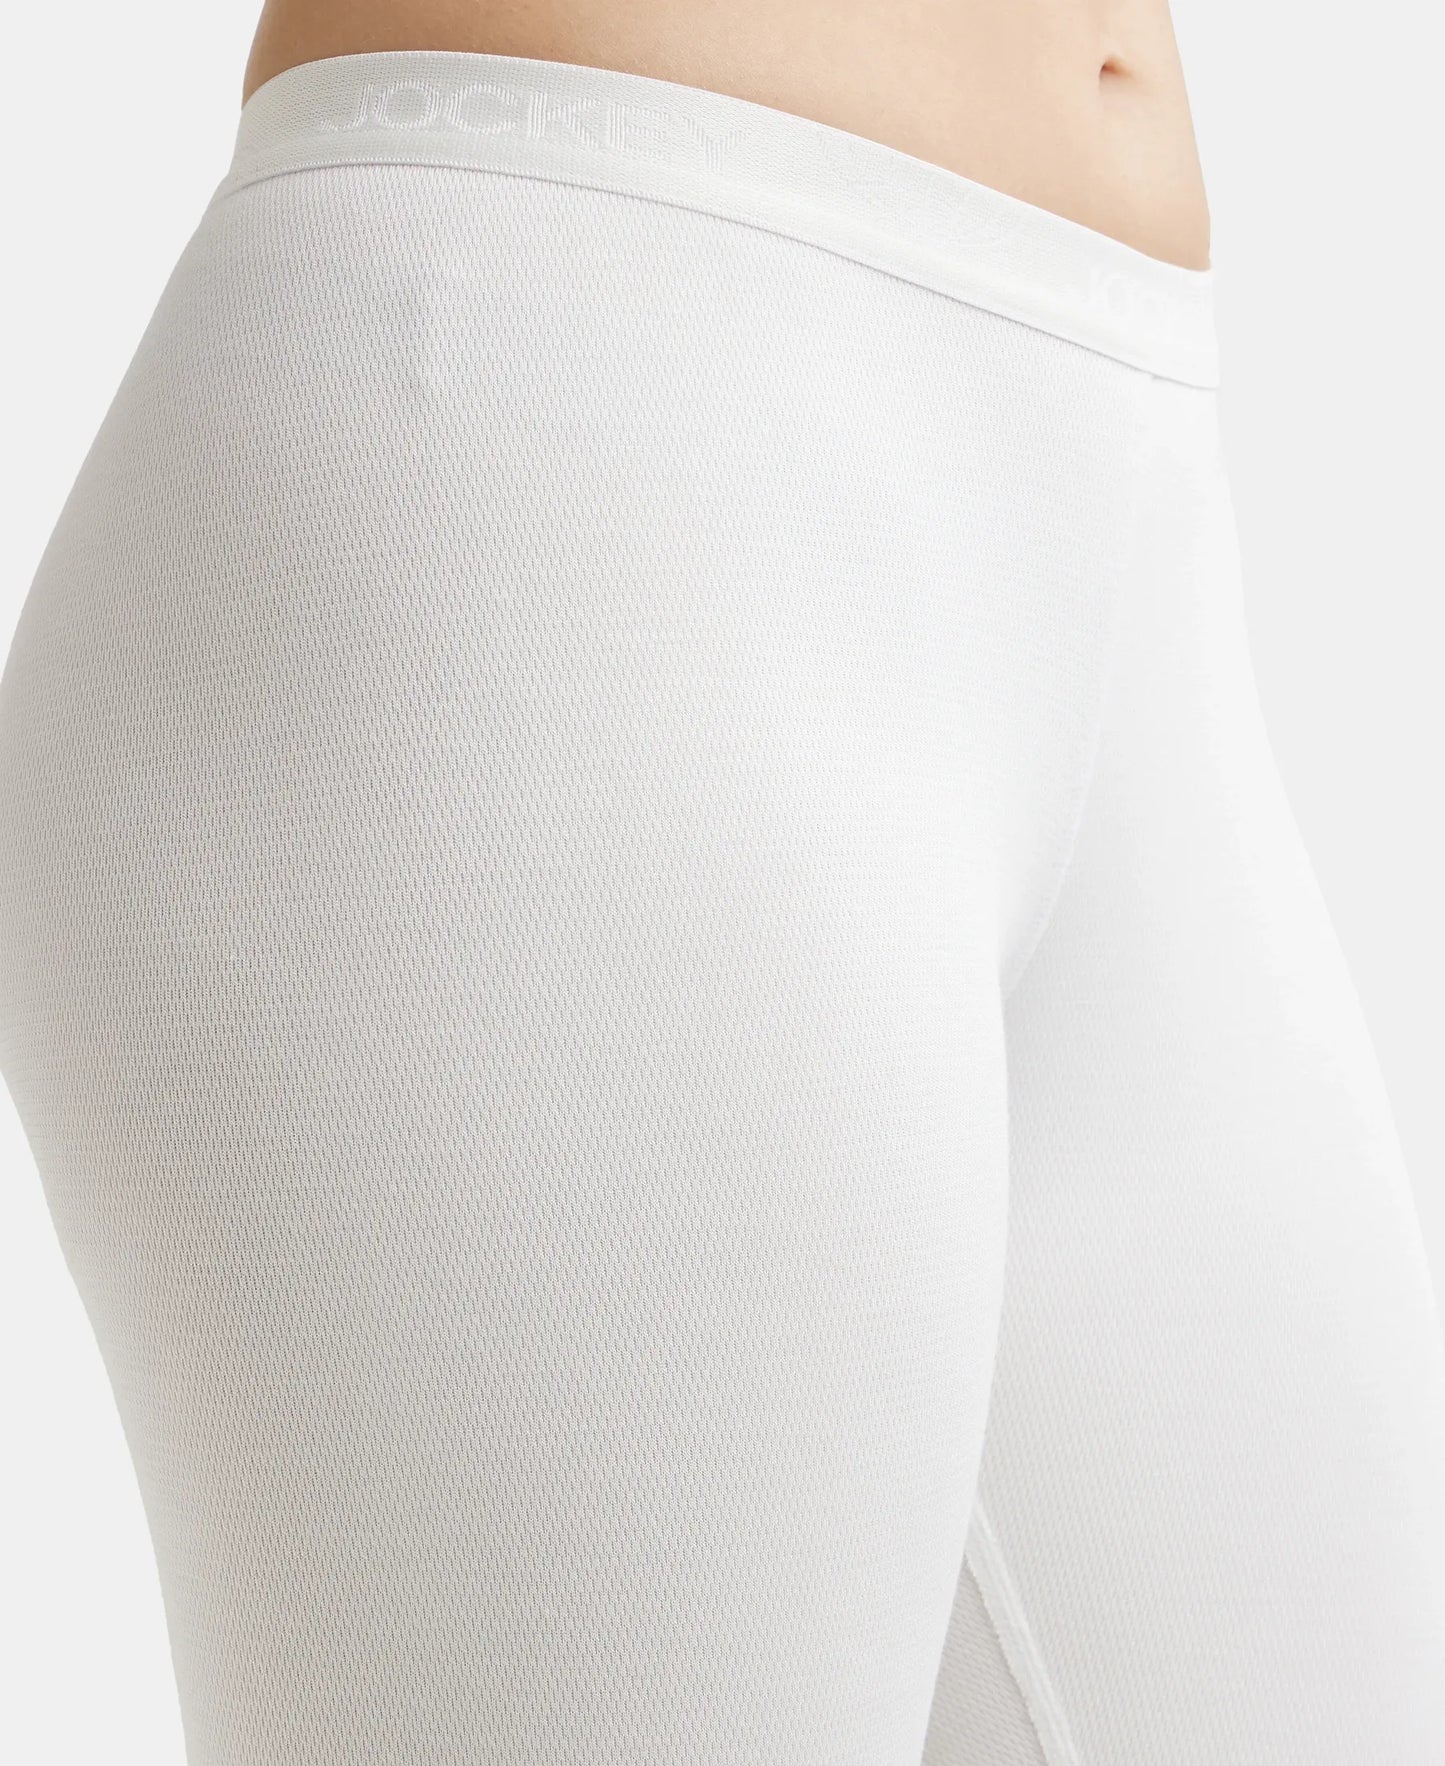 Soft Touch Microfiber Elastane Stretch Fleece Fabric Thermal Leggings with StayWarm Technology - Light Bright White-7